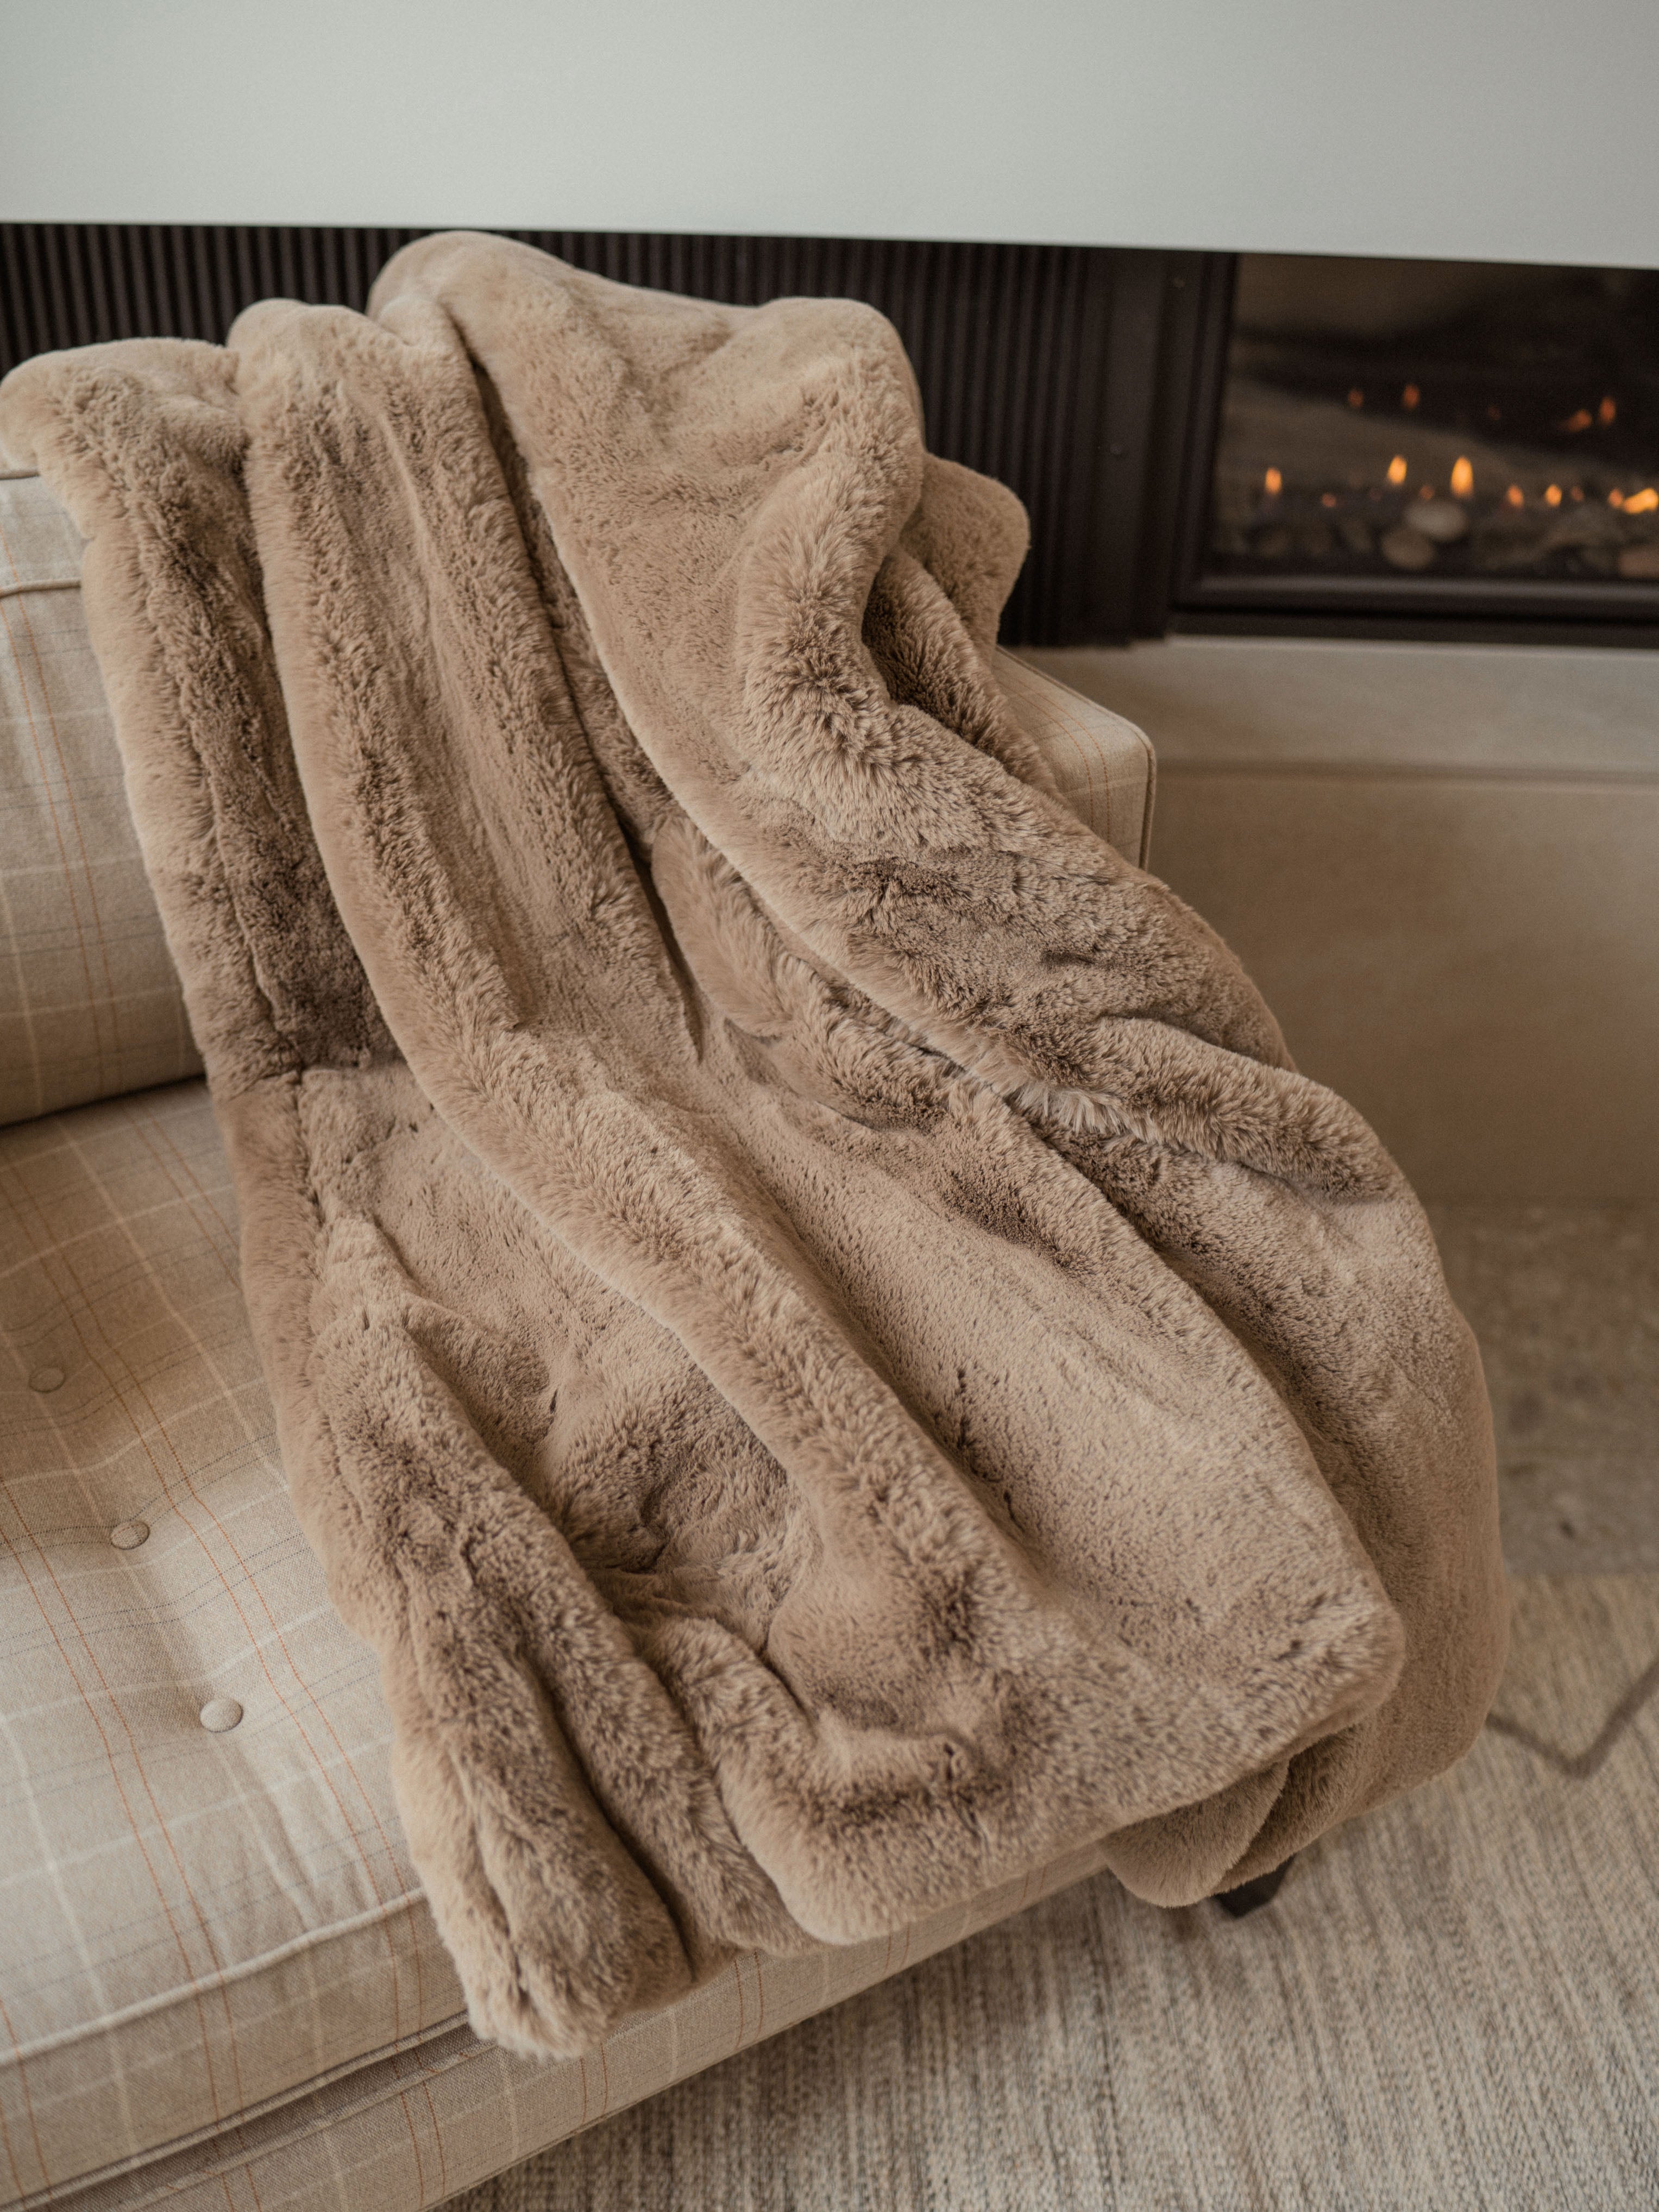 Walnut Oversized Throw Cuddle Blanket on the couch by the fireplace